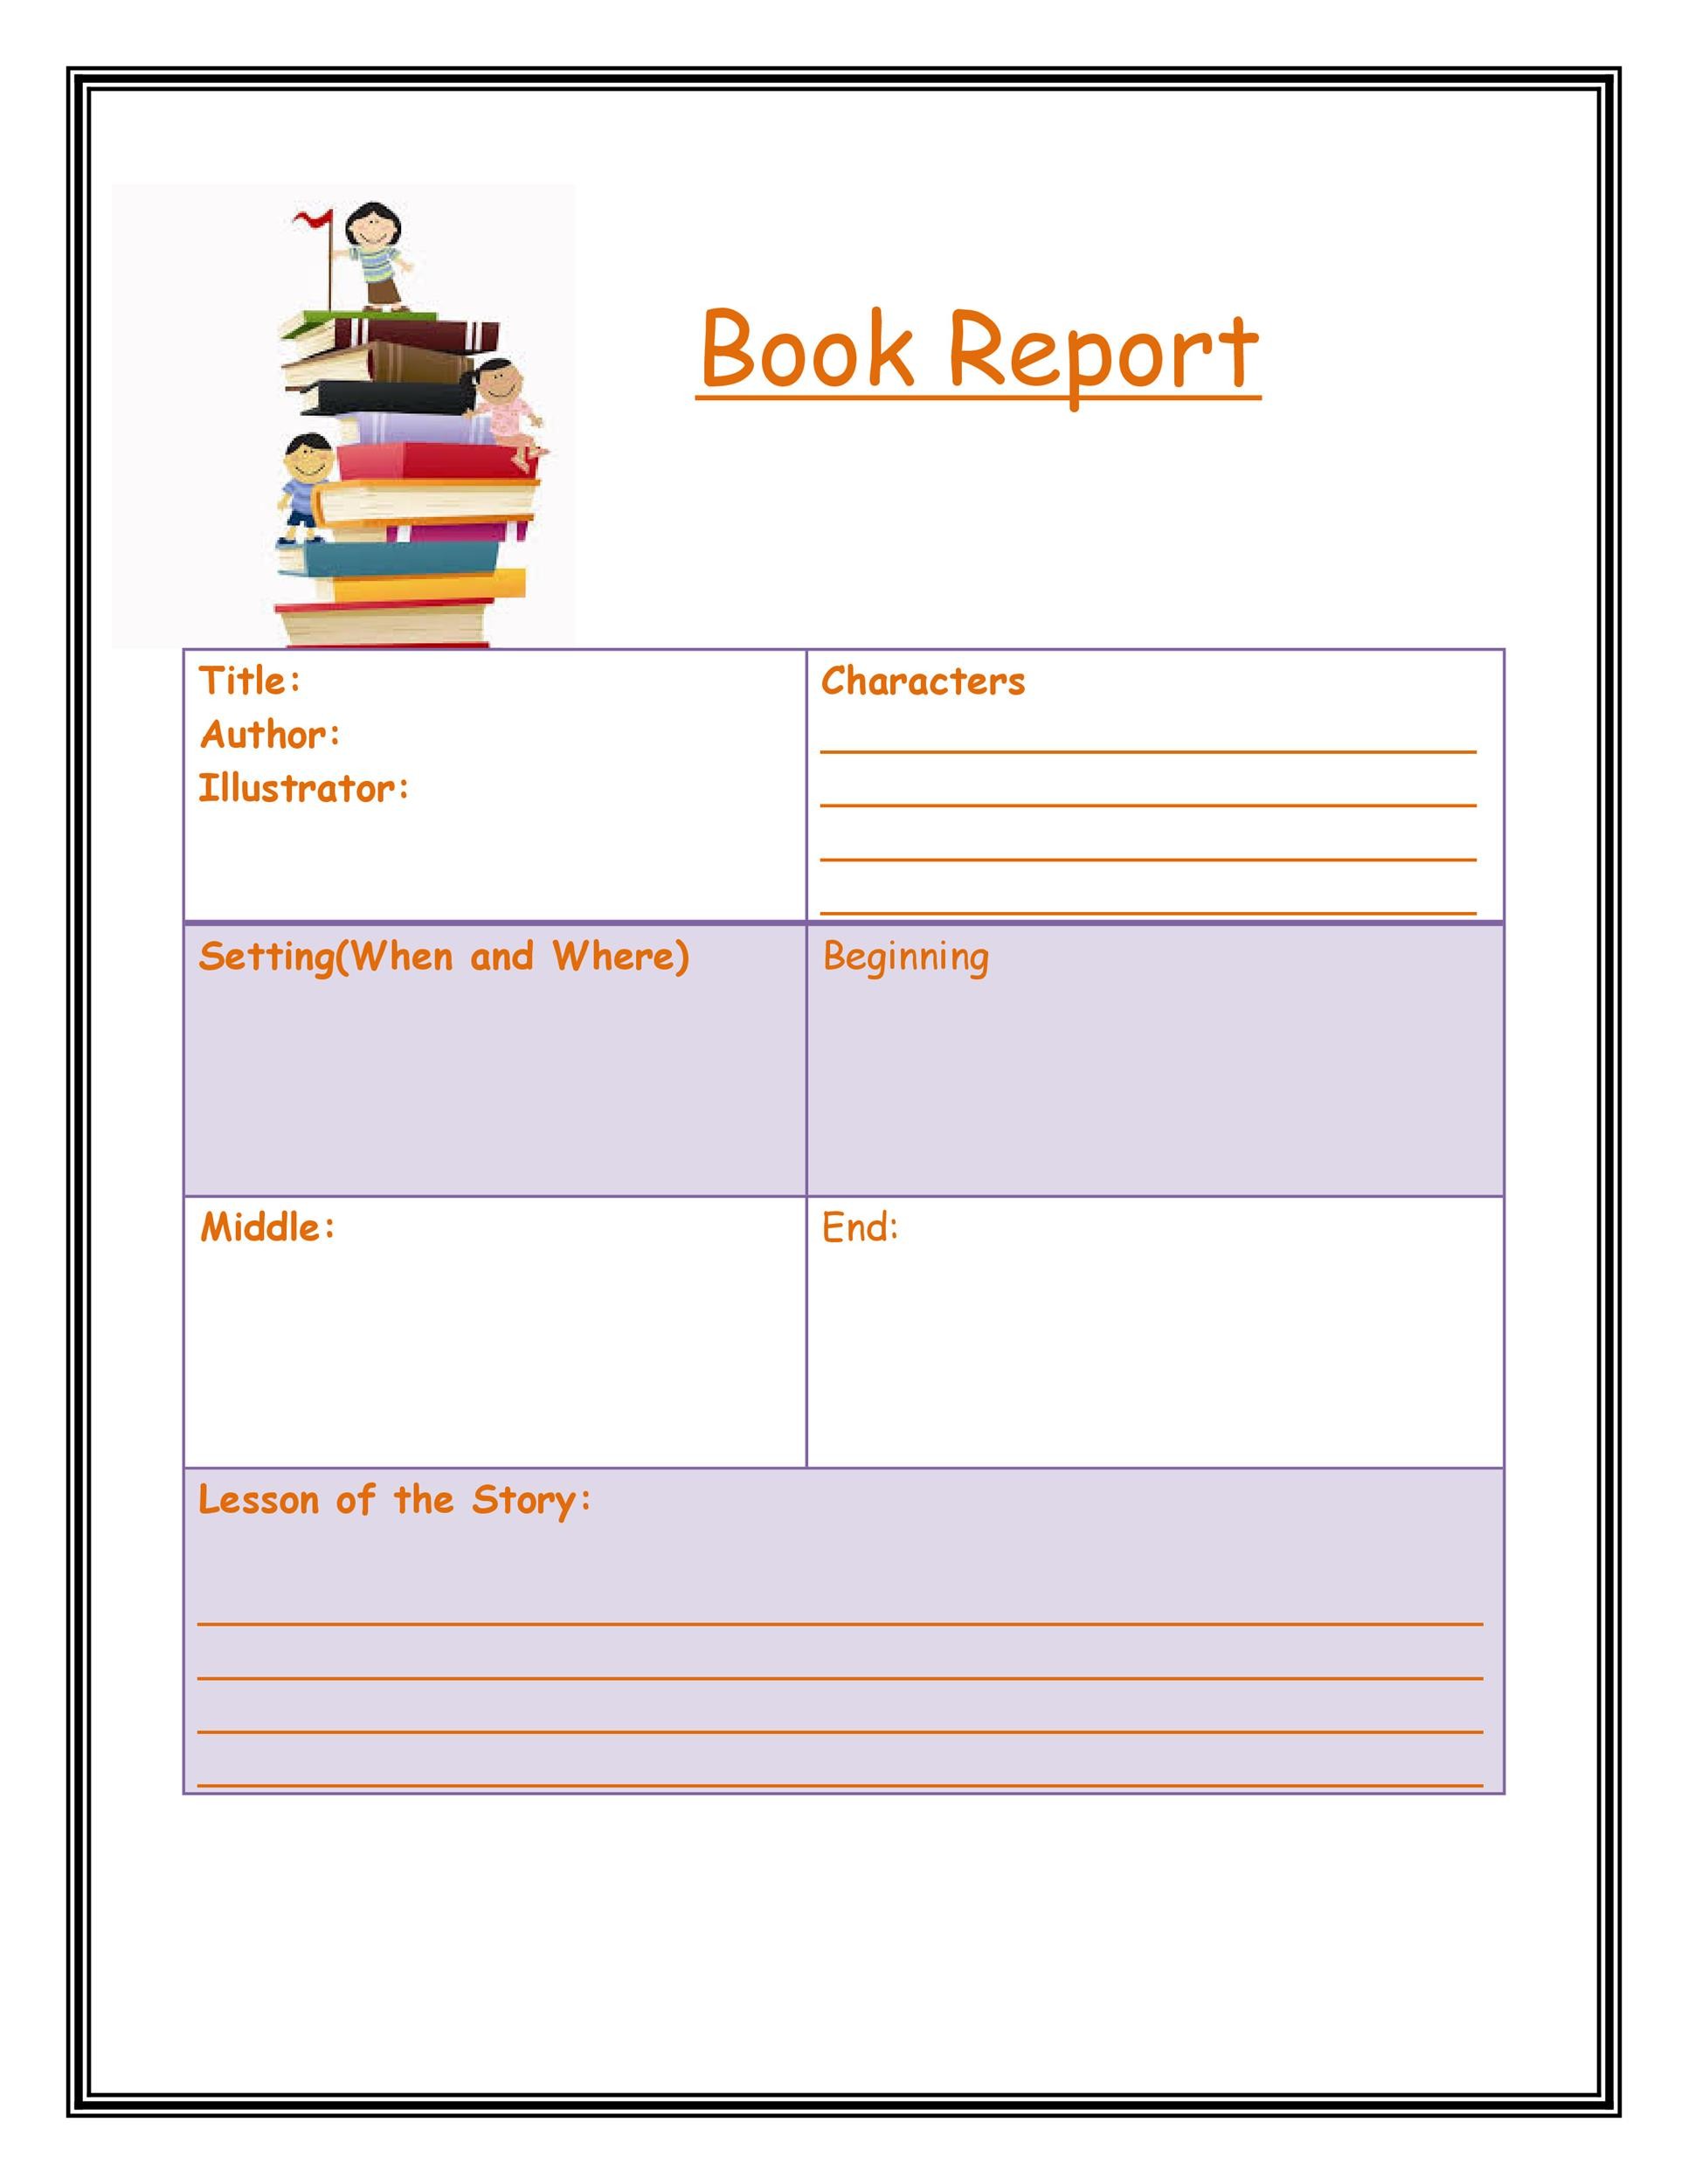 book report review